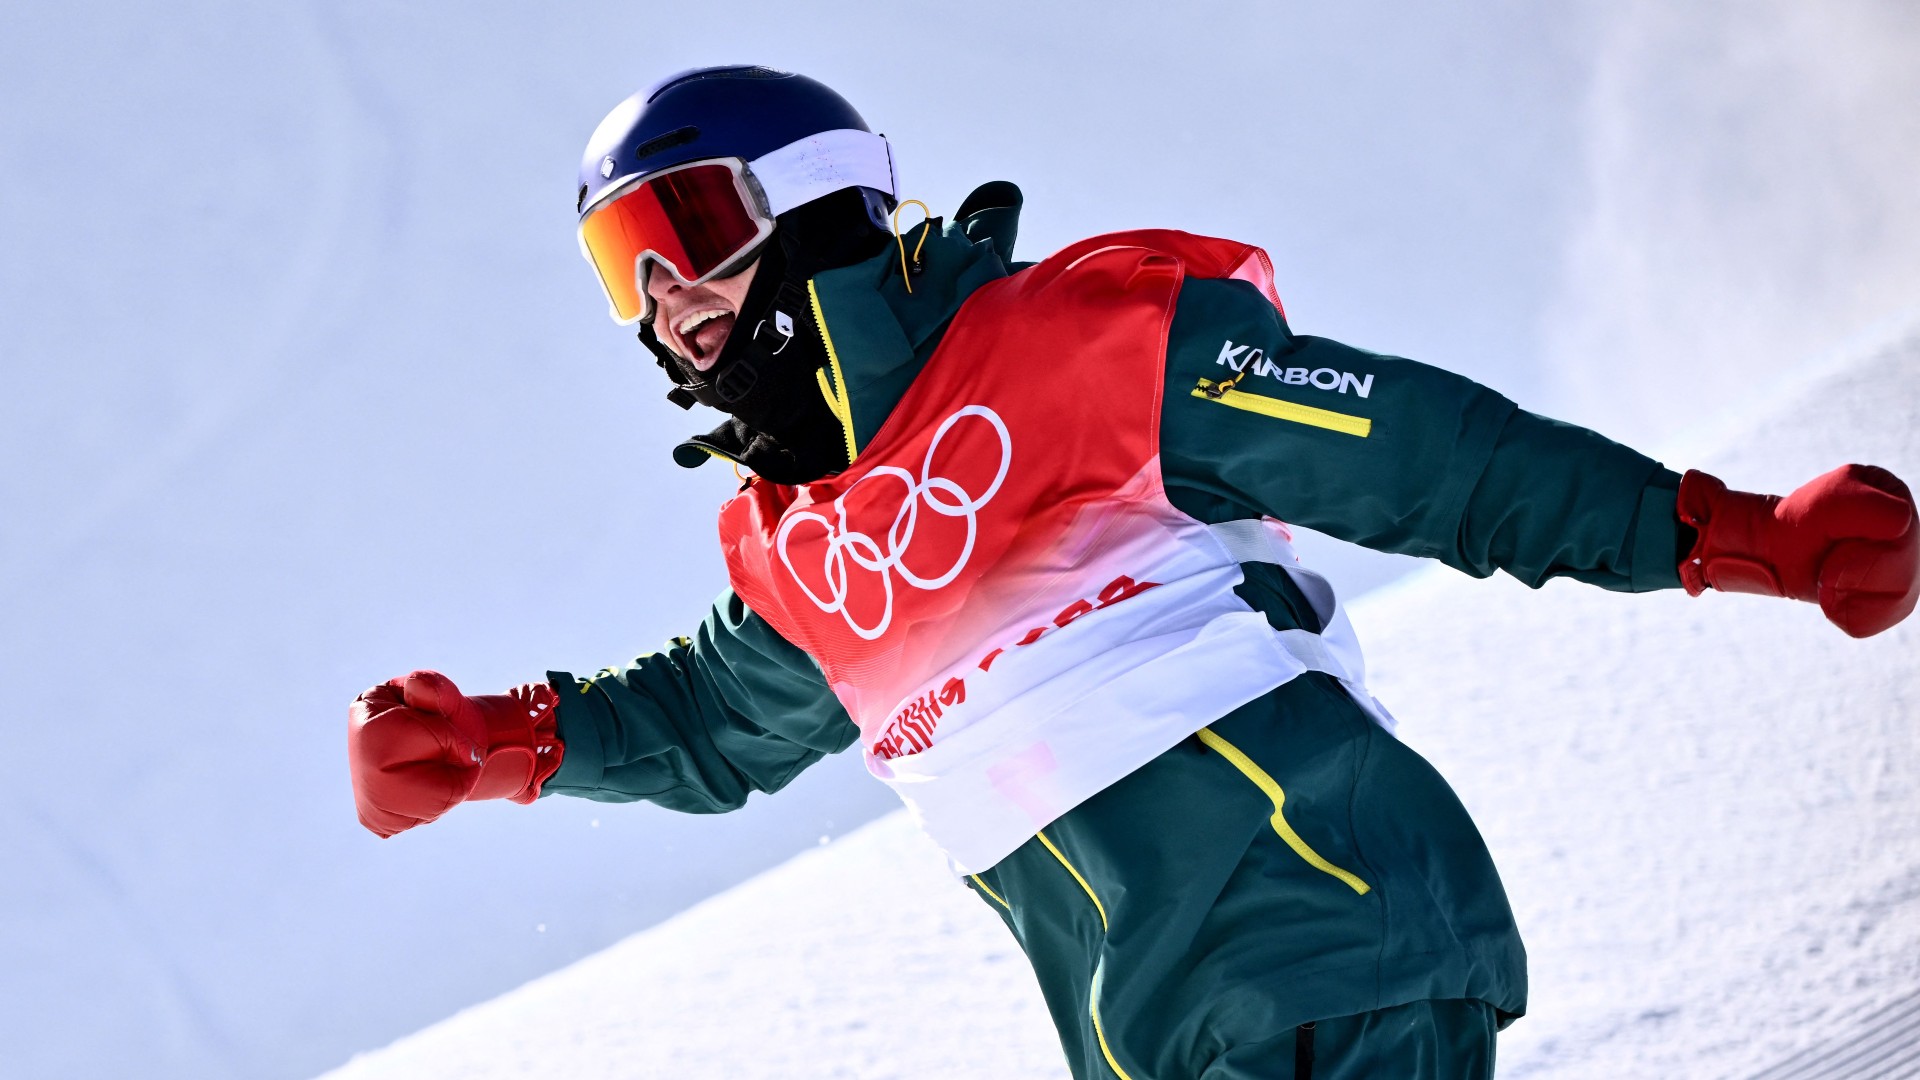 Scotty James wins Olympic silver in the men’s halfpipe